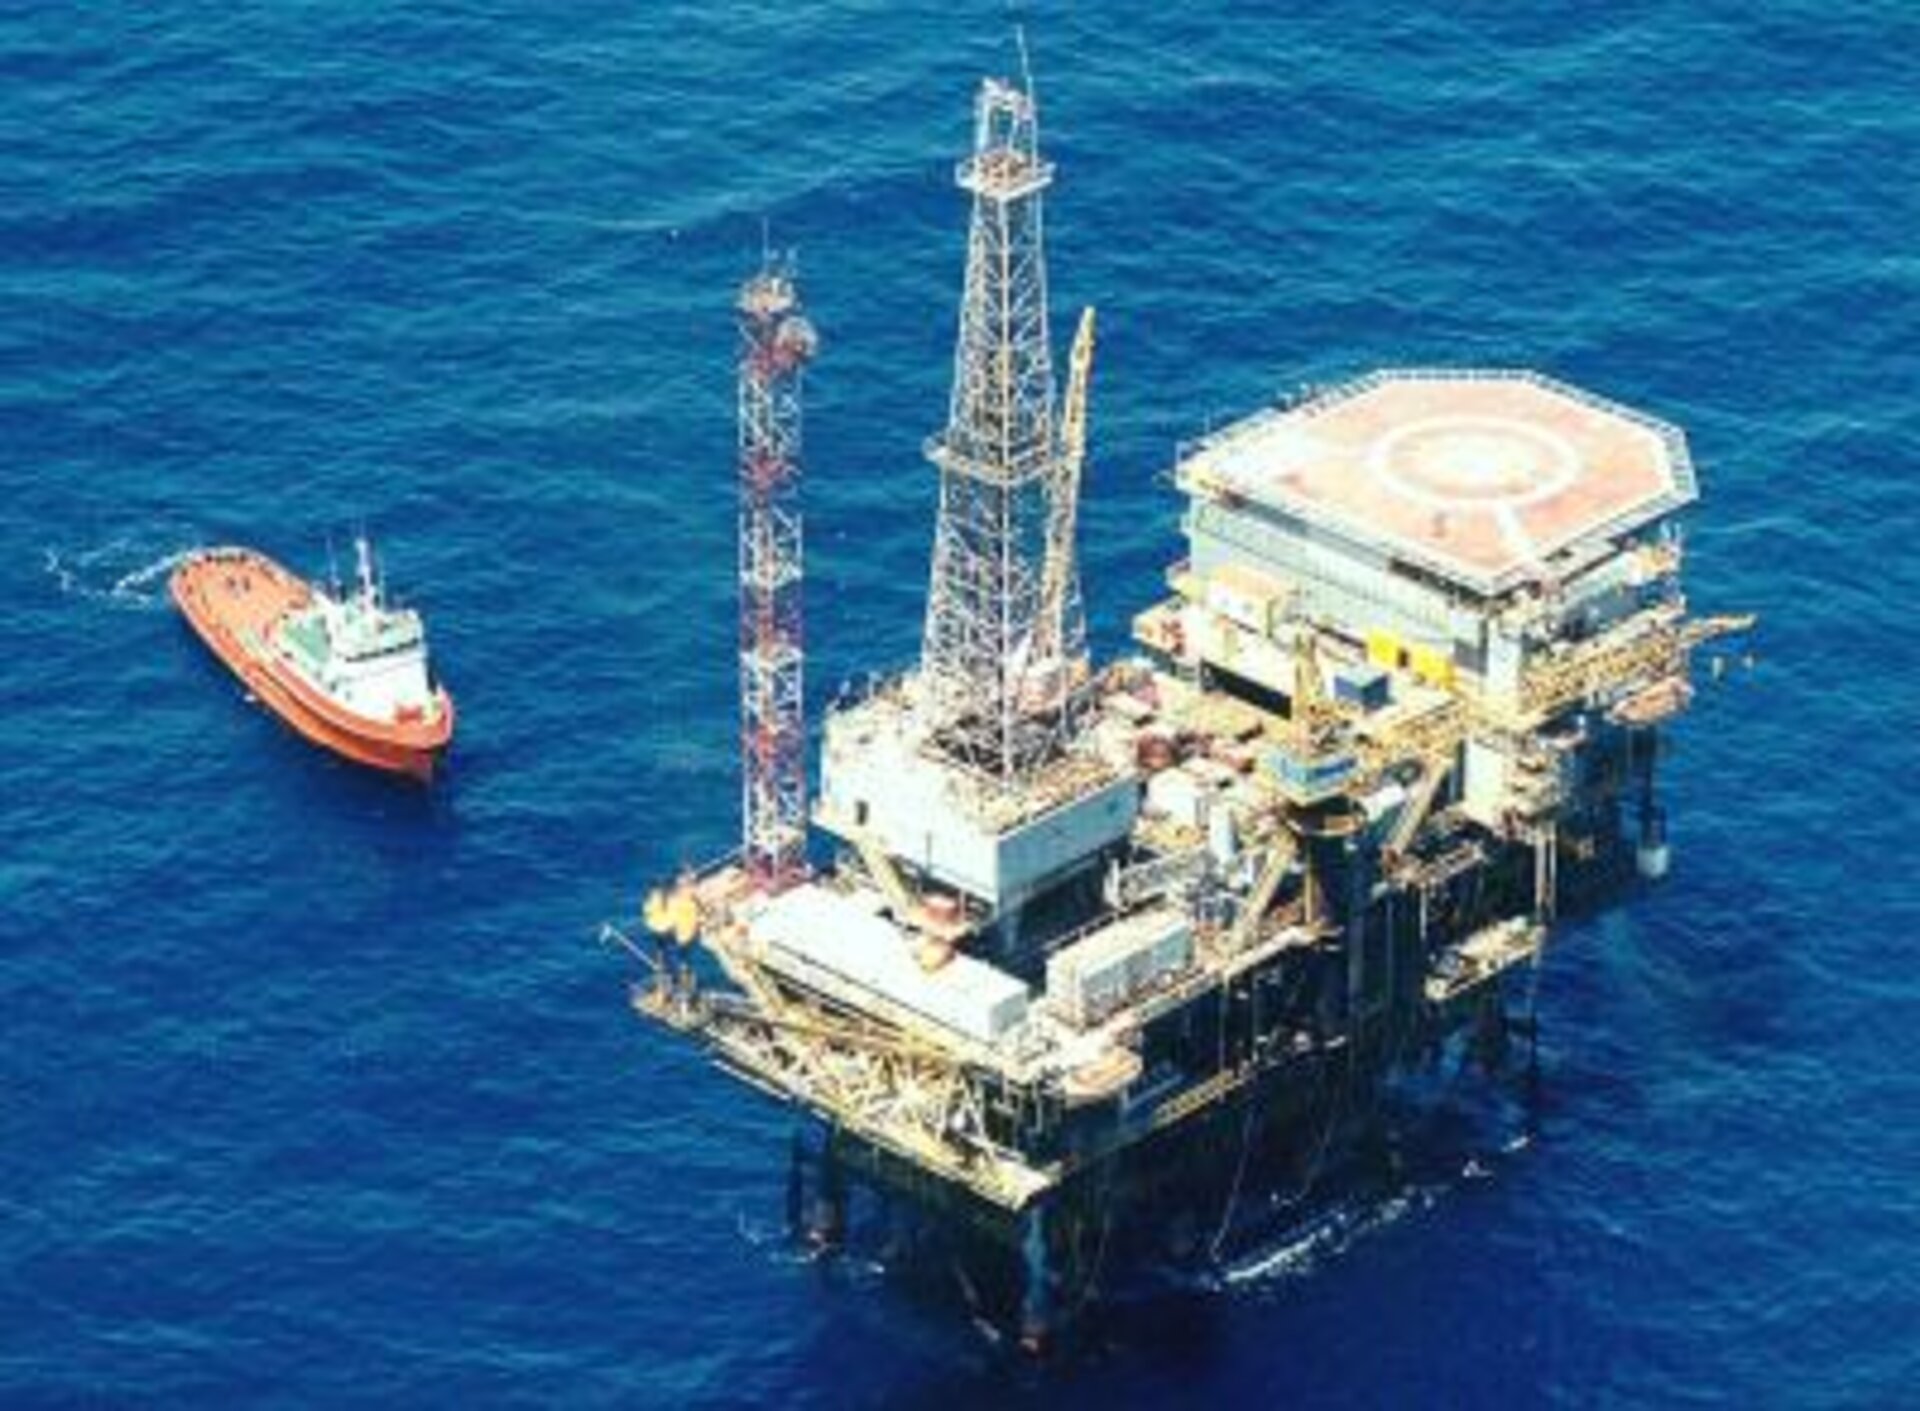 The oil rig platform used during the WISE campaign